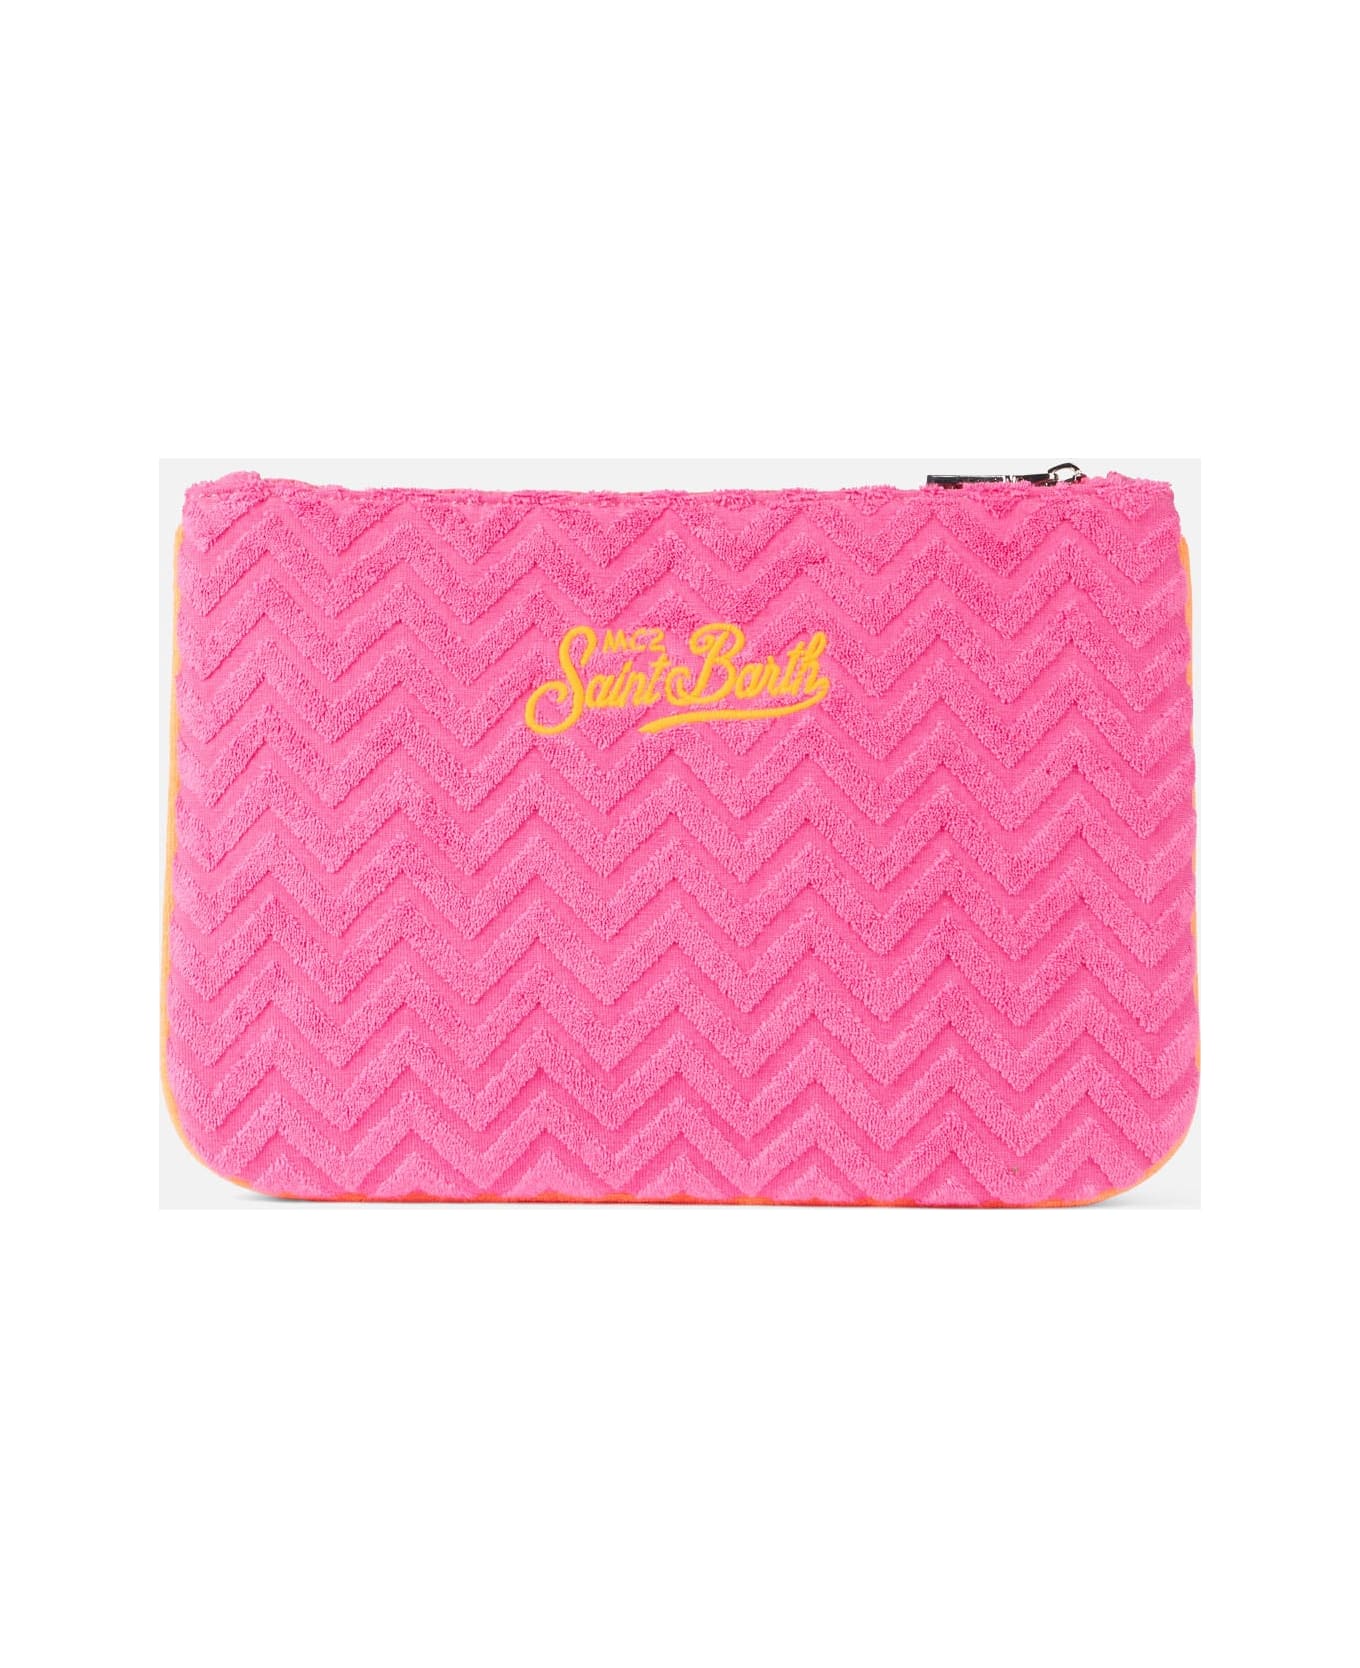 MC2 Saint Barth Parisienne Terry Pochette With Embossed Pattern - PINK